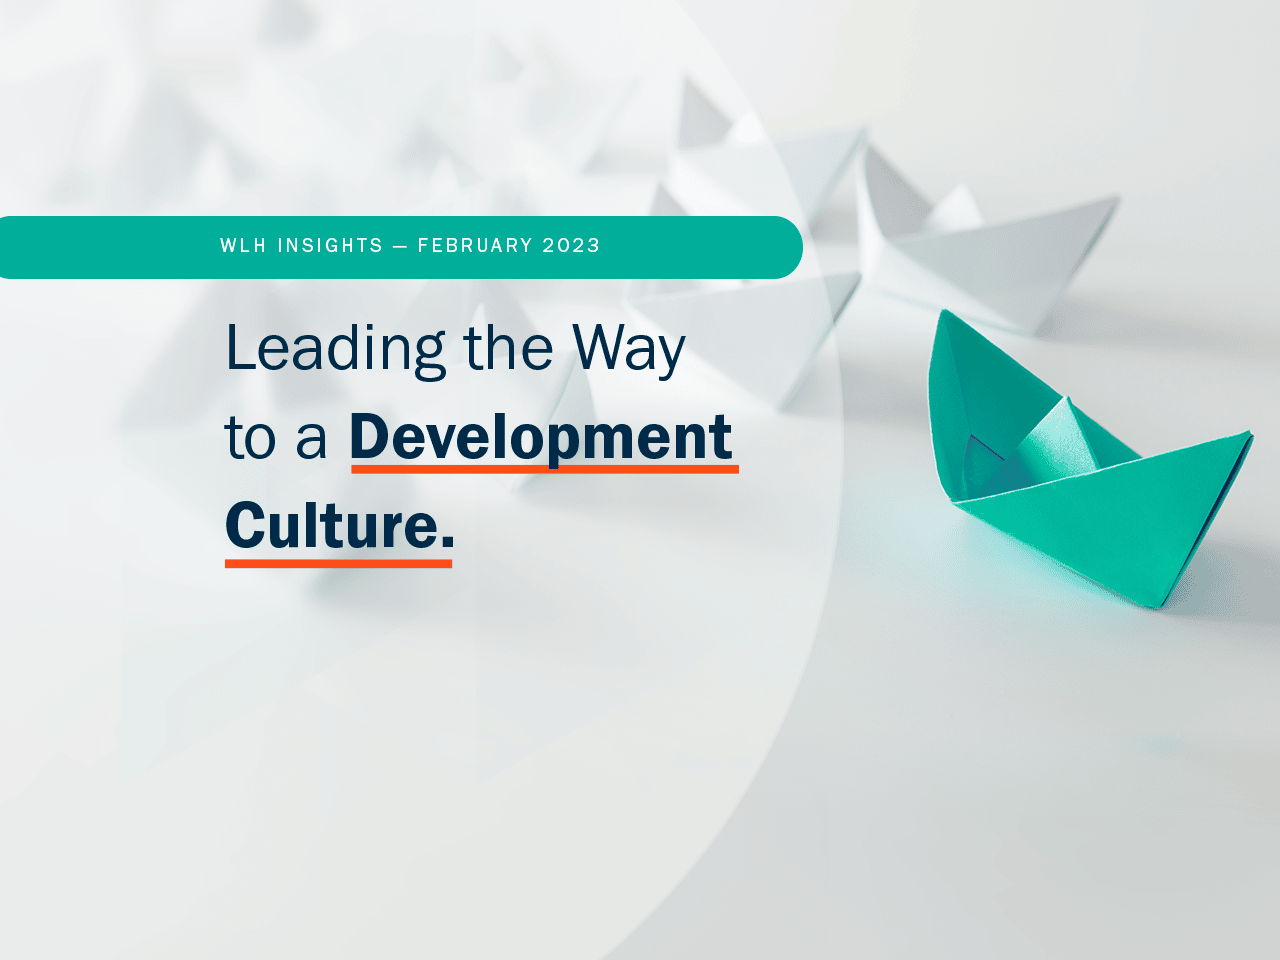 Leading the Way to a Development Culture